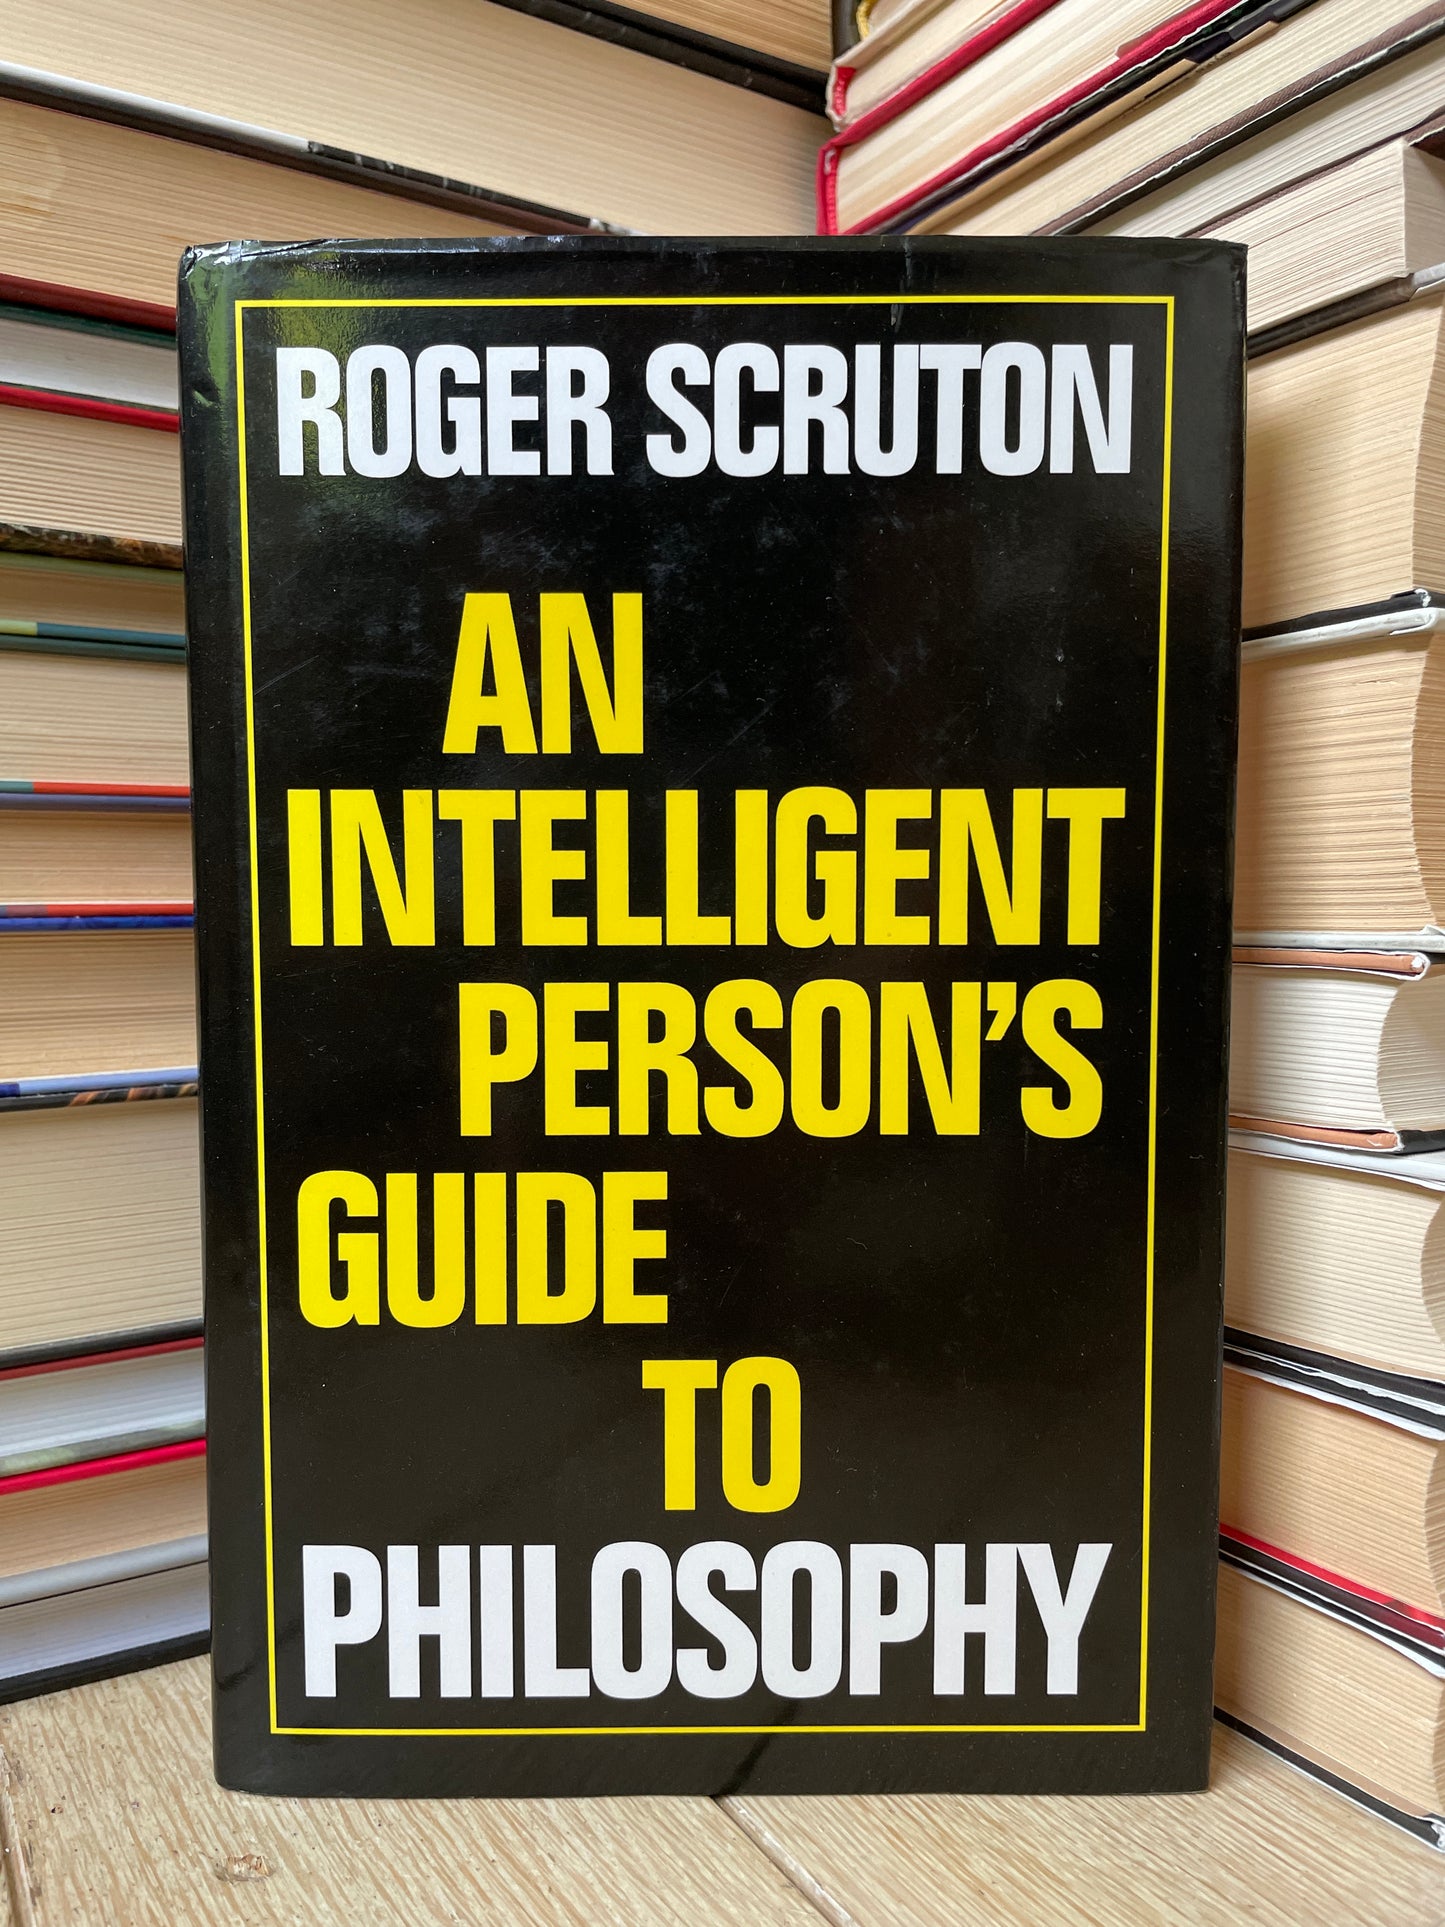 Roger Scruton - An Intelligent Person's Guide to Philosophy